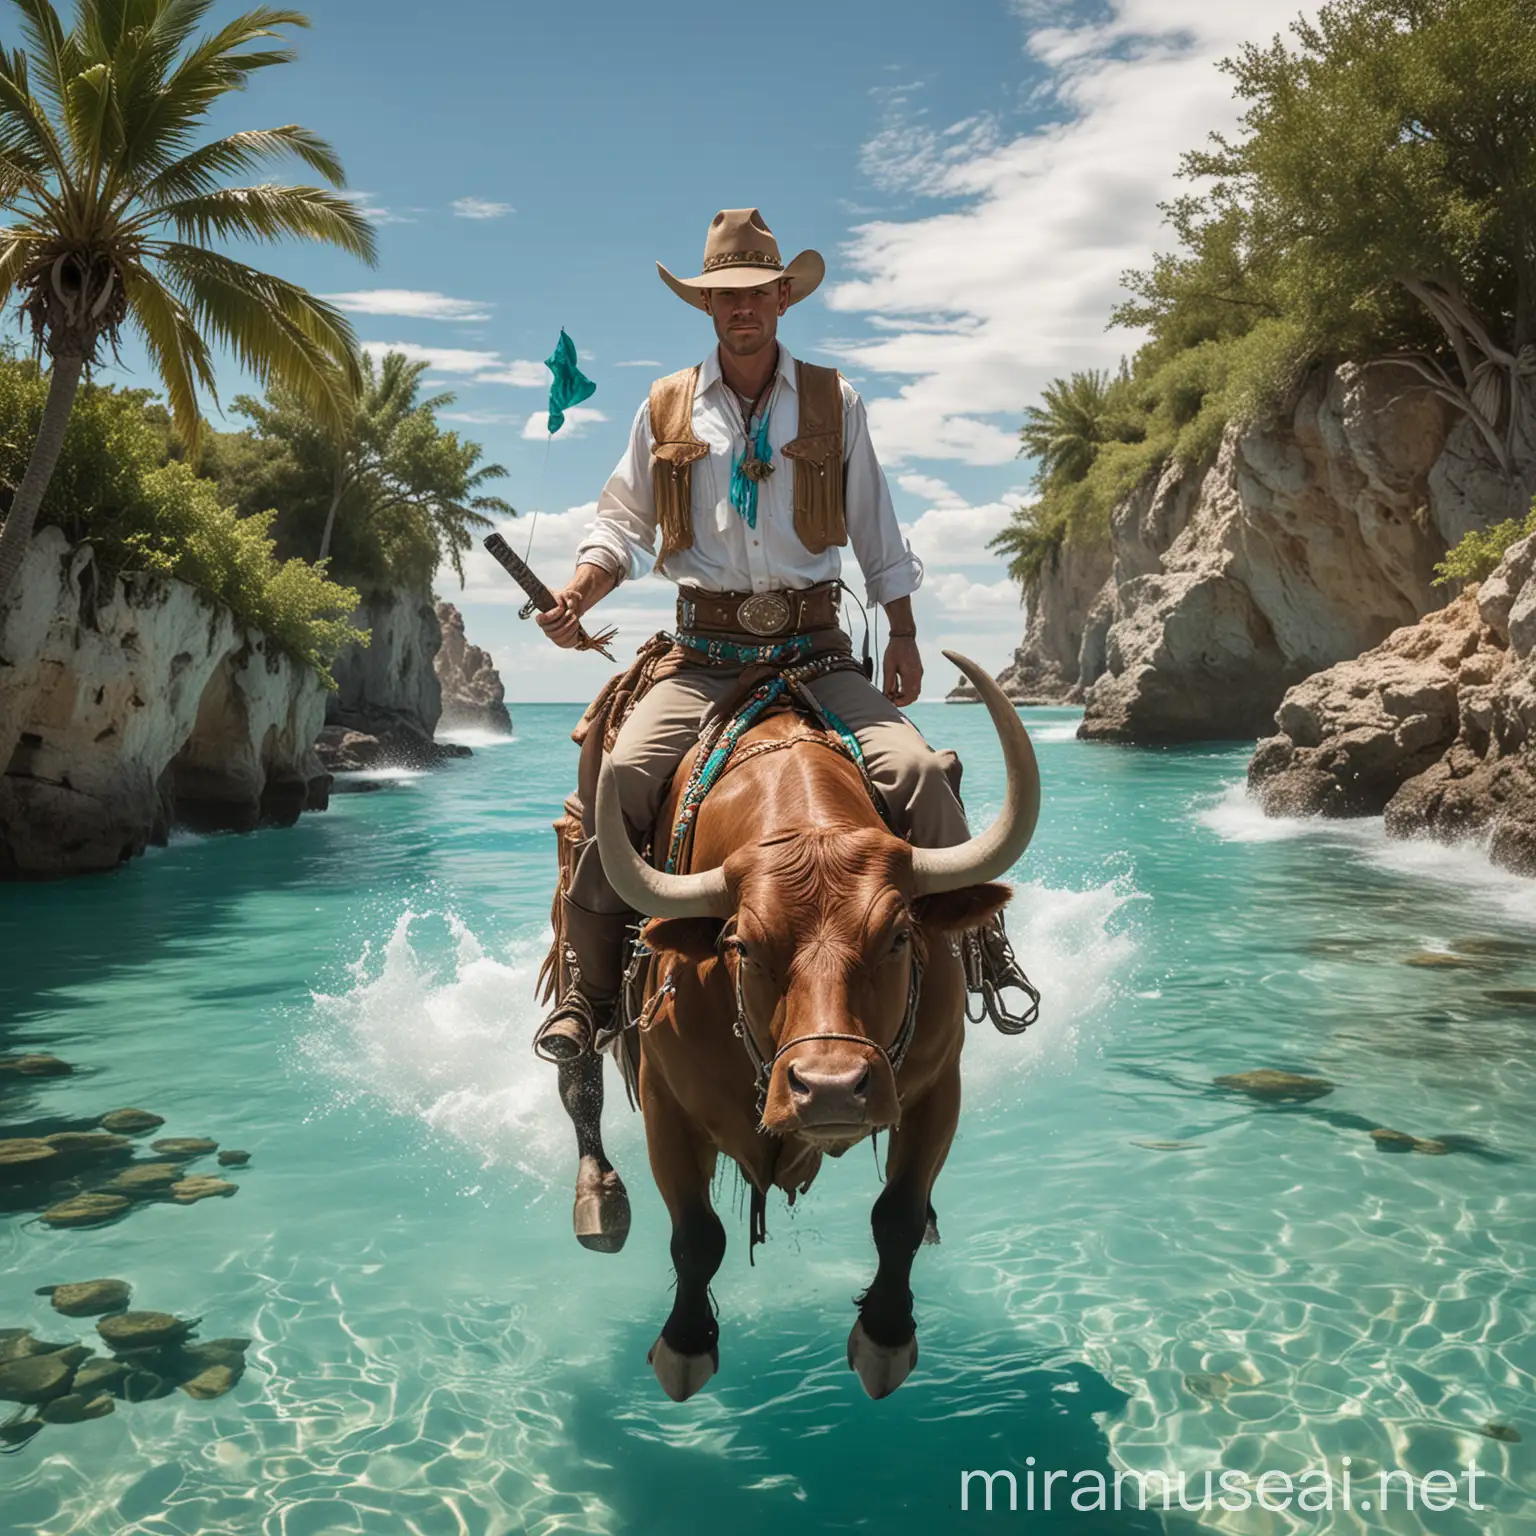 Pioneer Male Cowboy Jedi Riding Fearless Bull in Paradise with Turquoise Waters and Floating Dollar Signs